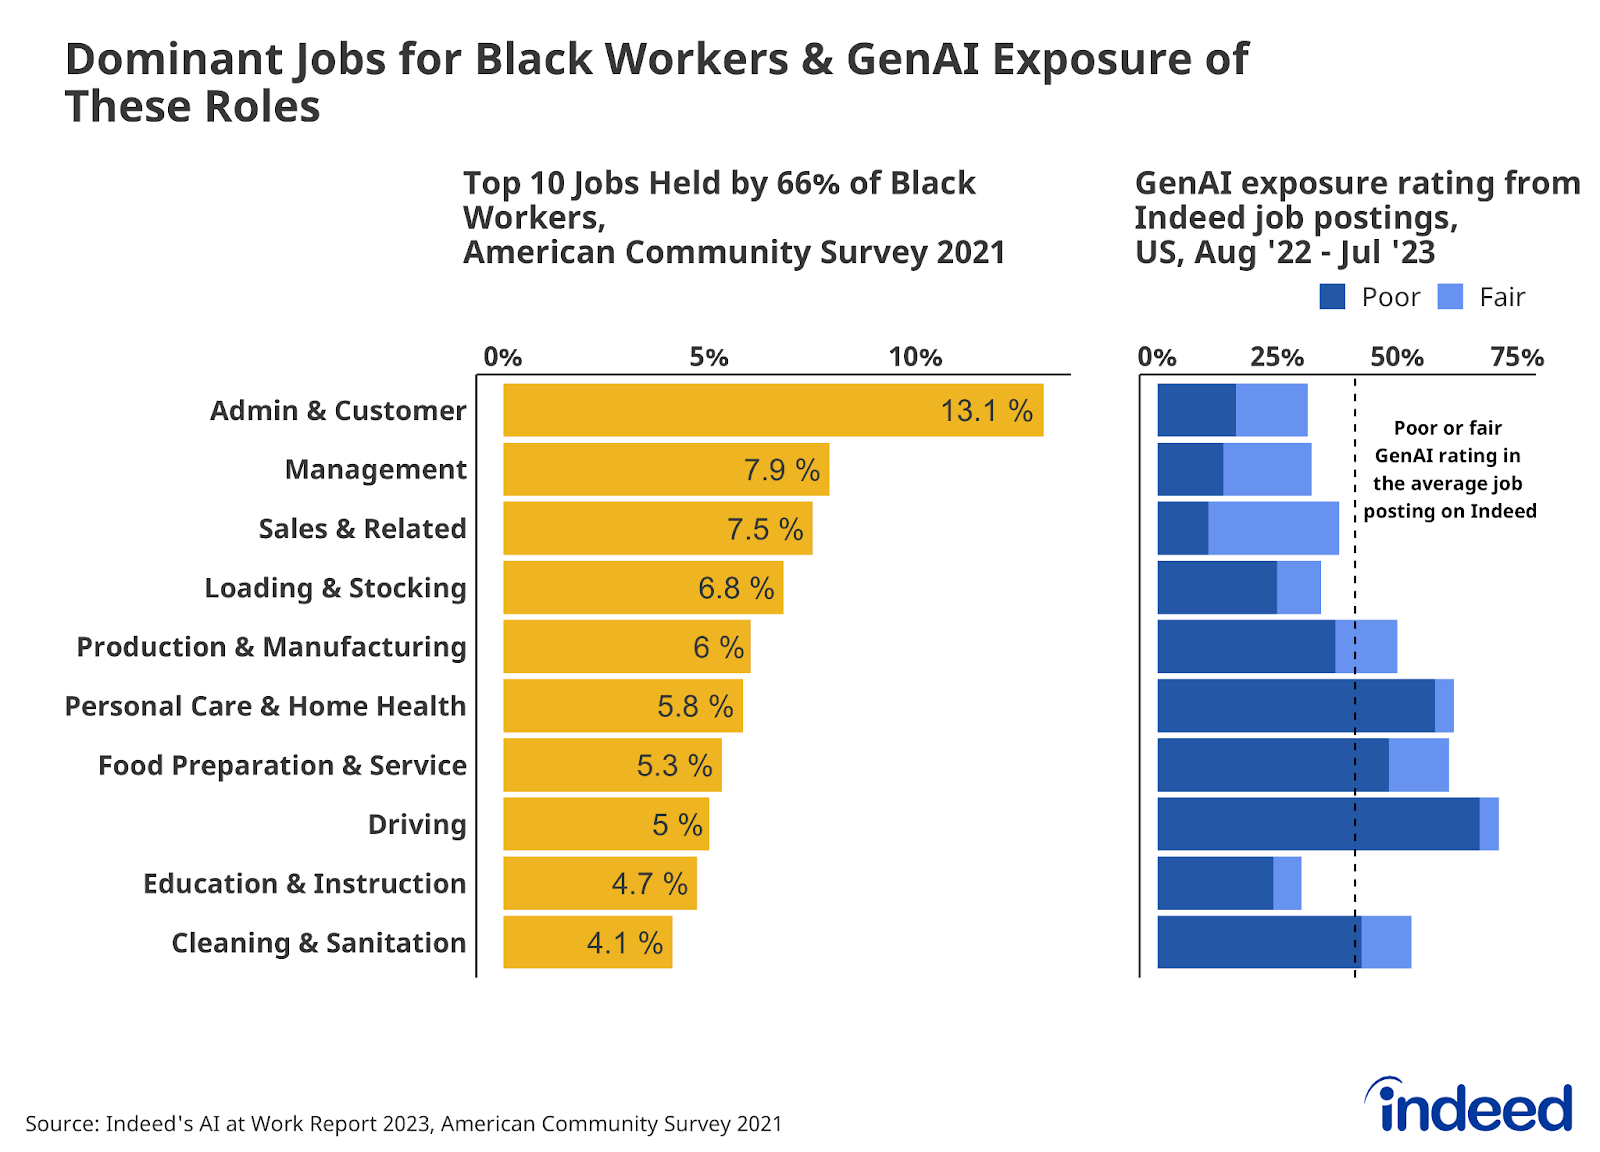 A series of two bar graphs titled "Dominant jobs for Black workers & GenAI exposure of these roles," shows the top 10 jobs held by 66% of Black workers and the corresponding GenAI exposure rating of those jobs. Admin & Customer was the most common type of job at 13.1%, while Cleaning & Sanitation was the rarest. 